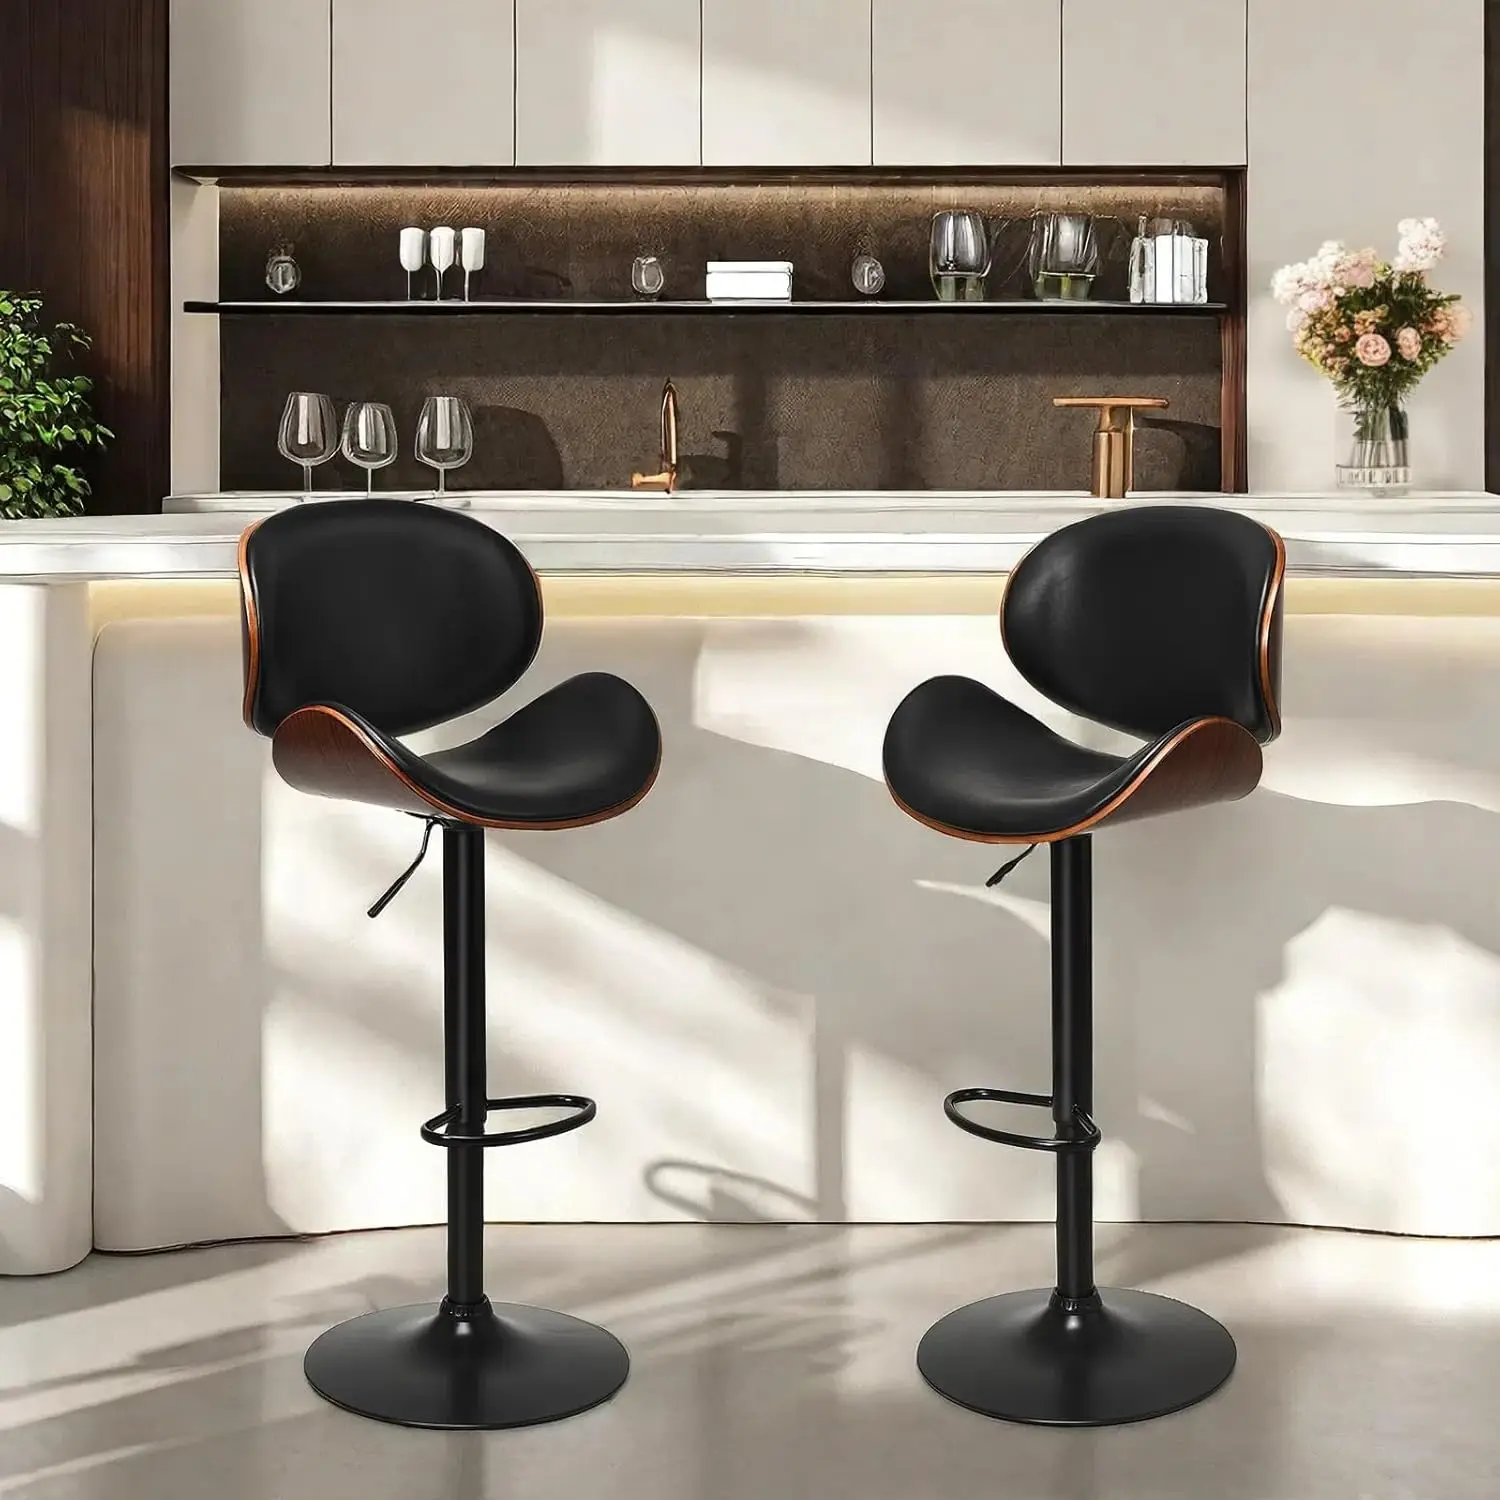 

Adjustable Bar Stools Set of 2 for Kitchen Island, Swivel Counter Barstools, PU Leather Upholstered Bar Chairs with Back for Bar